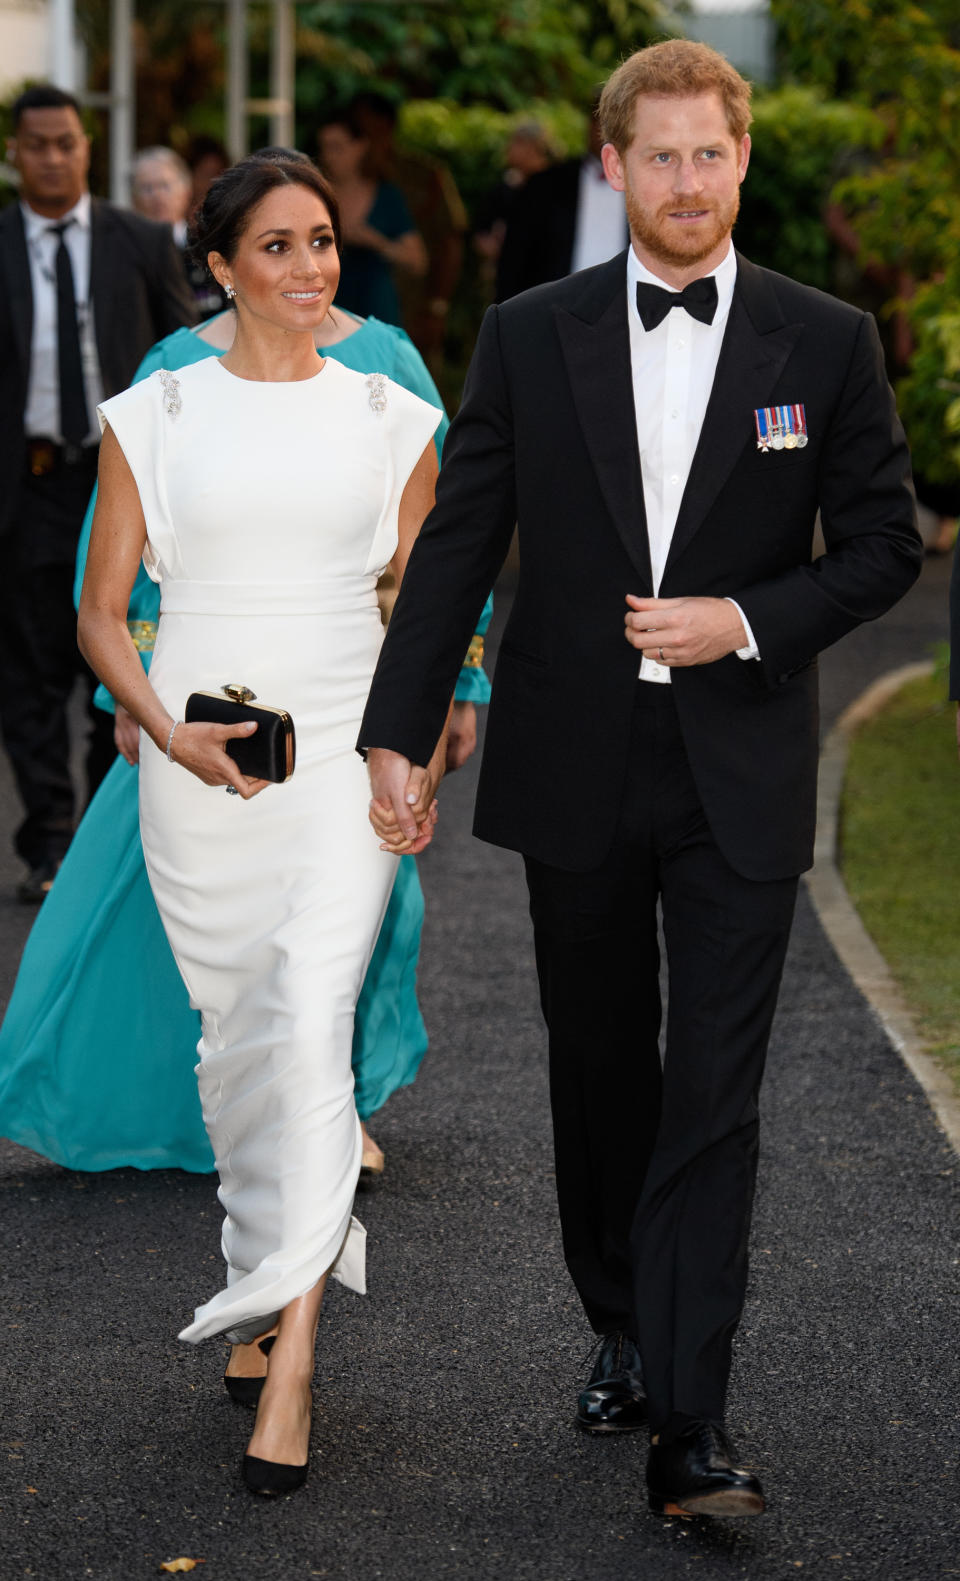 <p>For an evening reception and dinner in Tonga, the Duchess opted for a more formal look. The 37-year-old dressed her bump in a white gown by Theia Couture finished with Aquazzura shoes, Birks earrings and her go-to Givenchy clutch. In a touching nod to Princess Diana, the Duchess wore the late royal’s aquamarine ring. <em>[Photo: Getty]</em> </p>